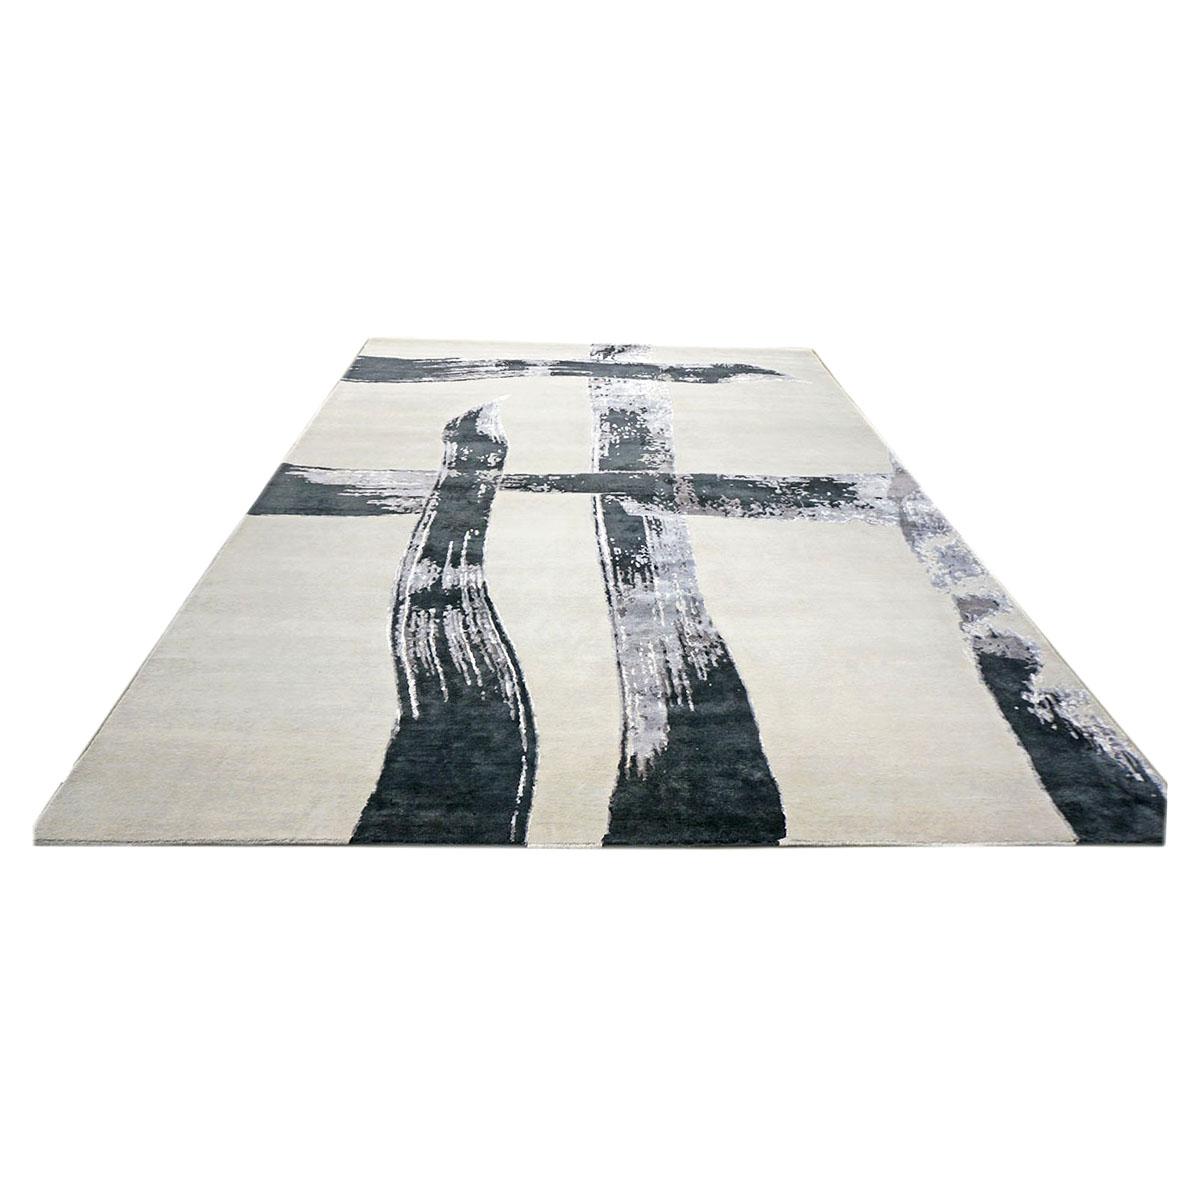 Ashly fine rugs presents a New Modern inspired wool & silk 8x10 ivory, black, & grey handmade area rug with lustrous shiny fibers and a thick durable pile. This gorgeous collection has been designed by our in-house designer and handmade by the